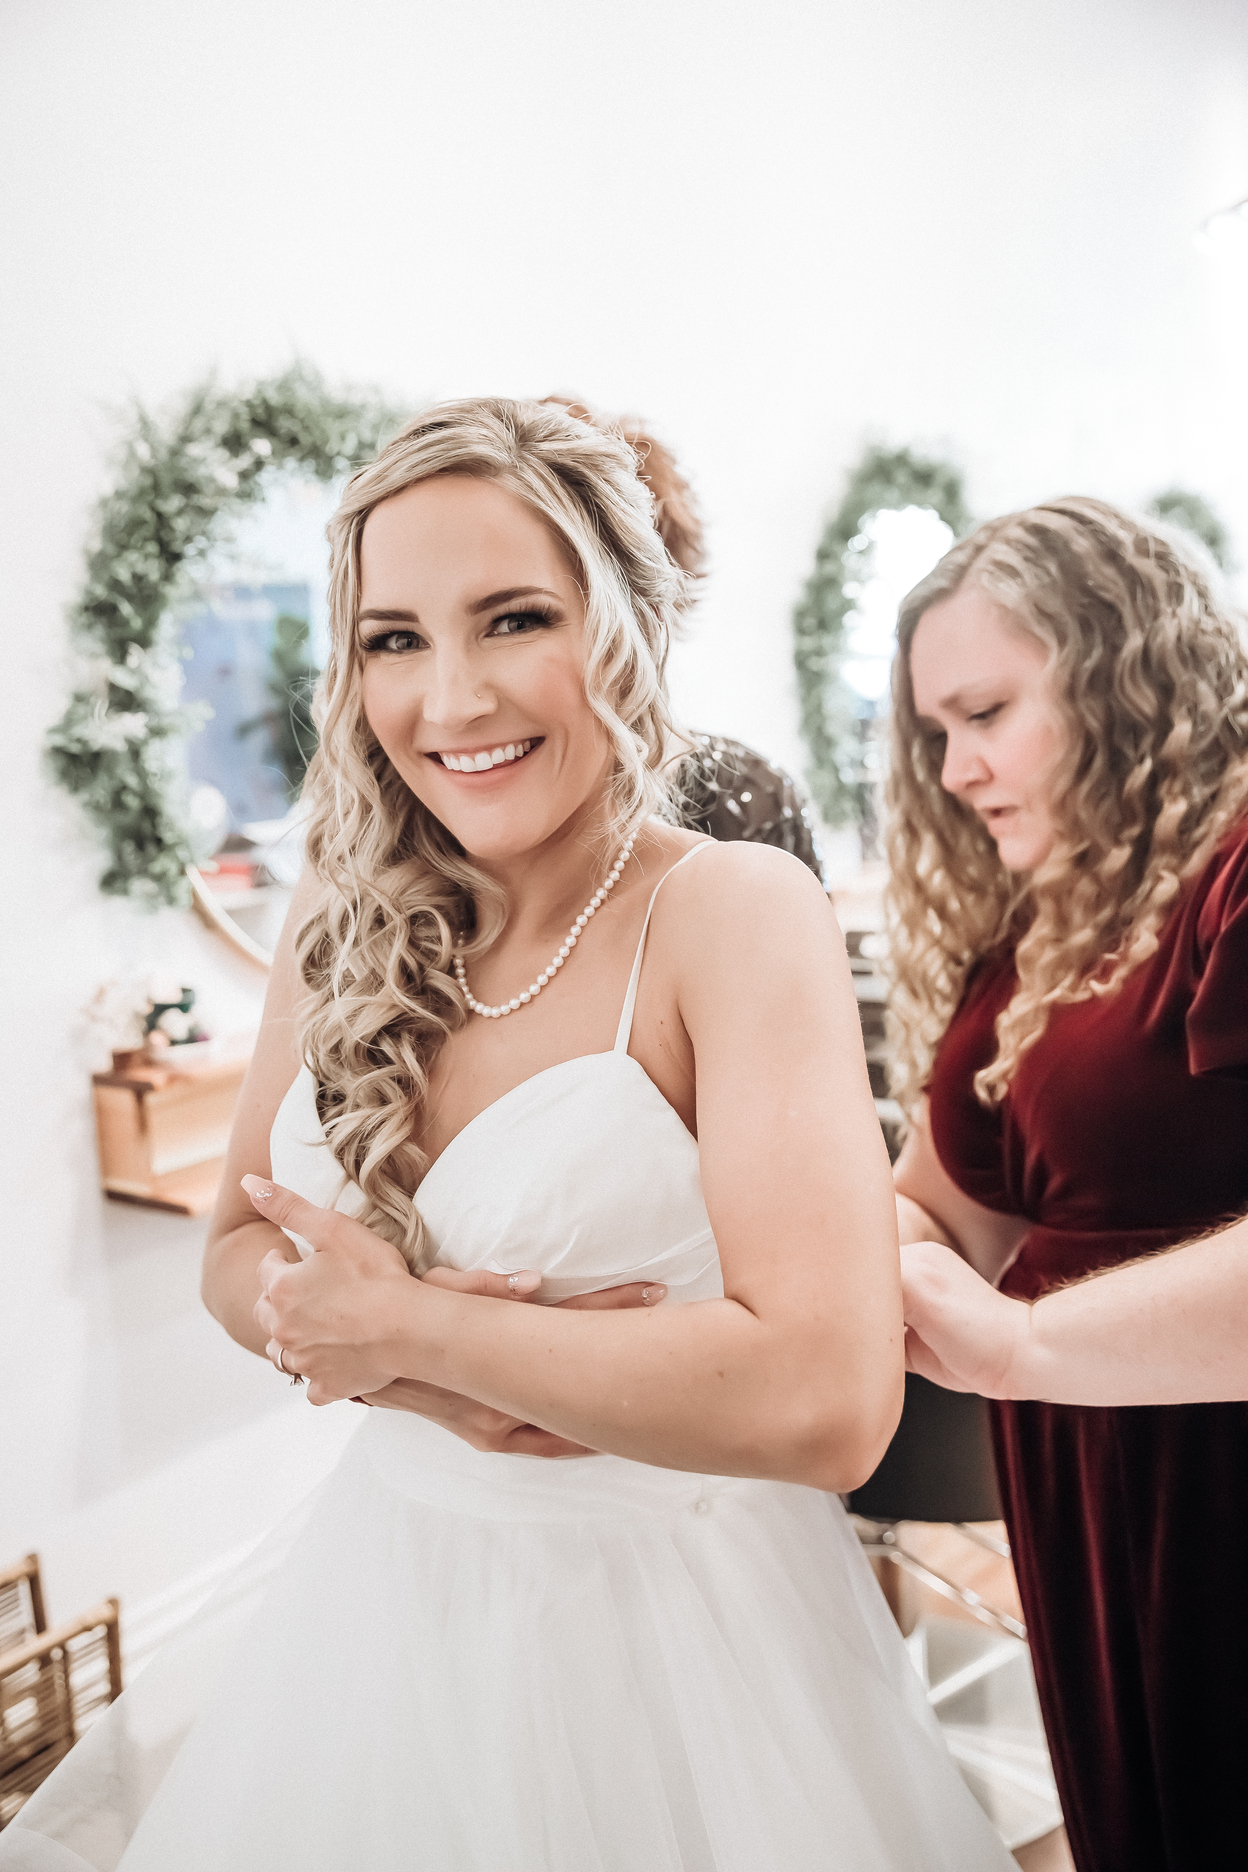 Wedding photo of a bride getting her dress zipped up in Omaha Carmen photographer